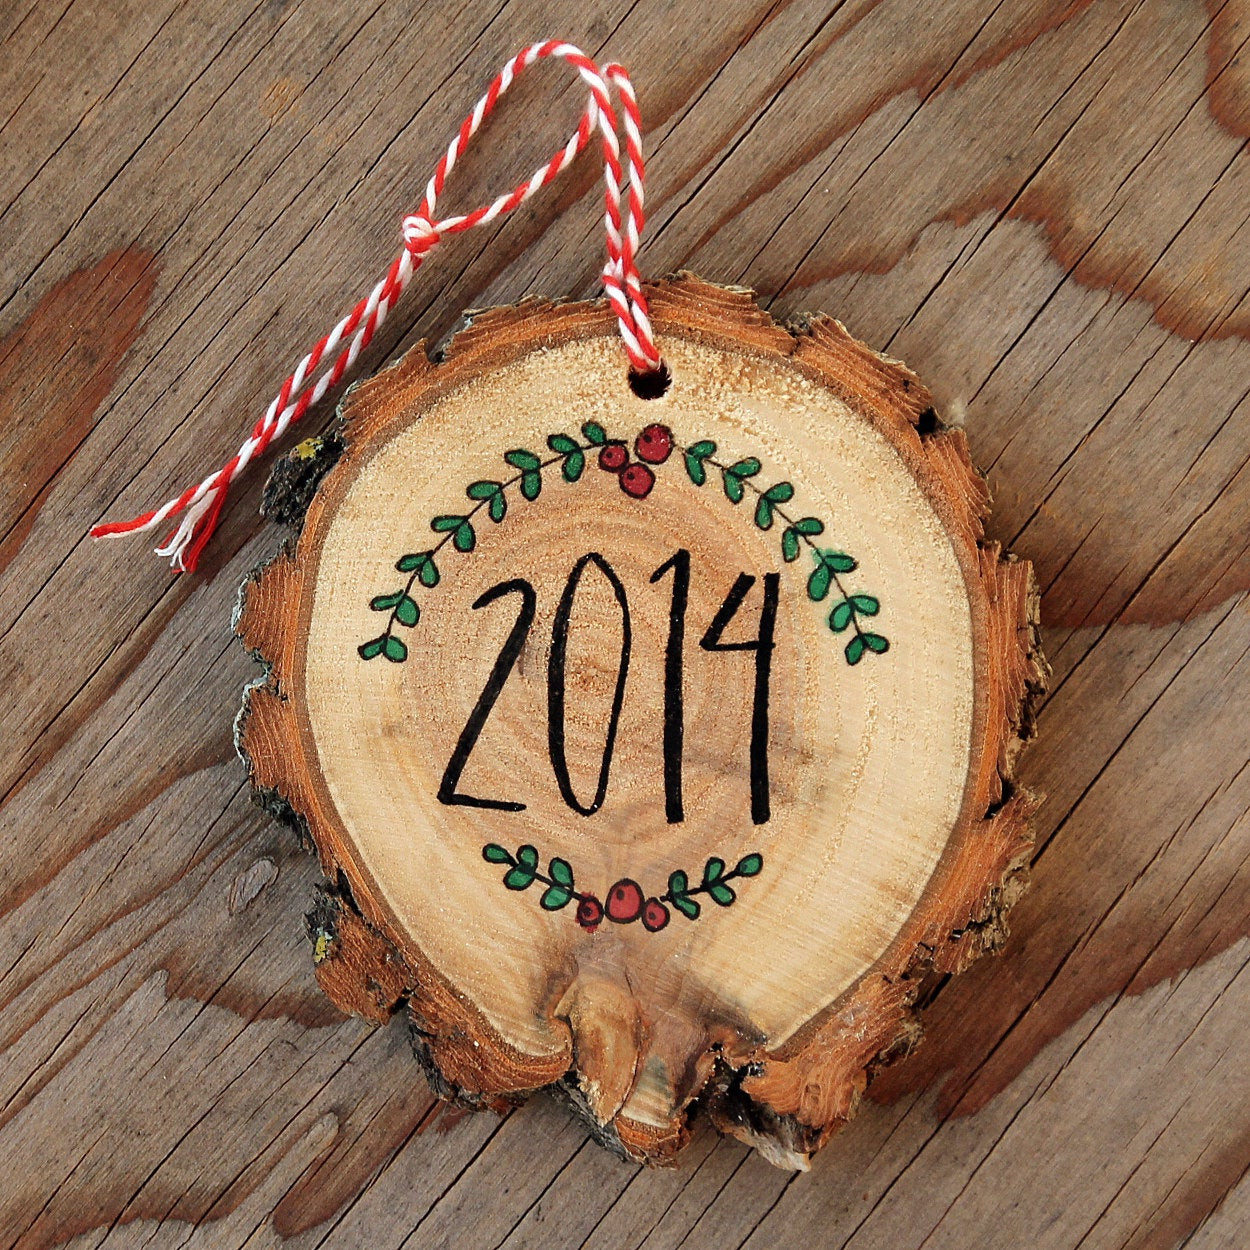 DIY Wood Christmas Decorations
 Natural Wood Slice 2014 Christmas Ornament Hand Lettered